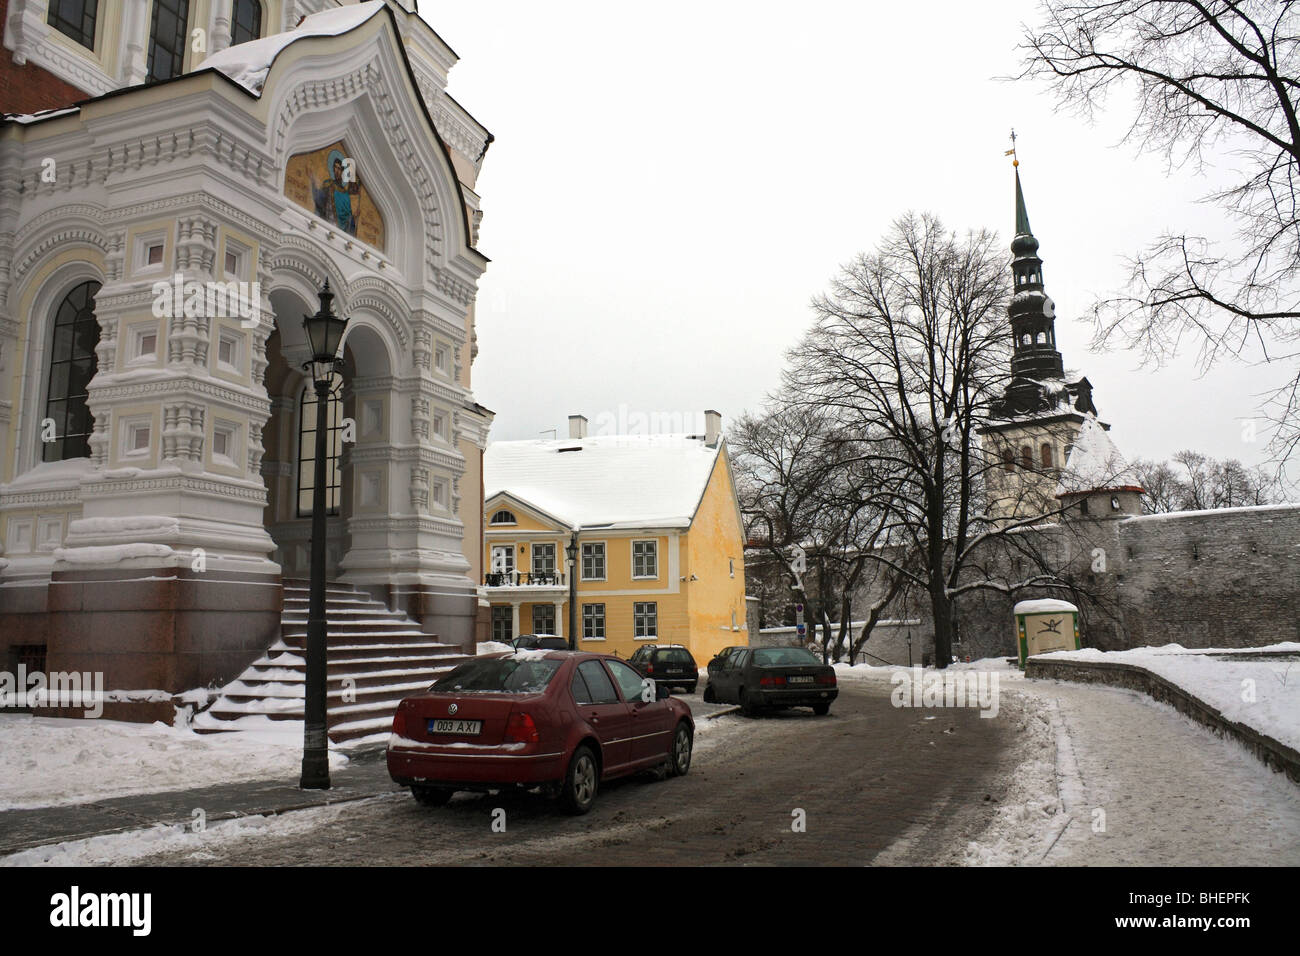 Snow covered street in front of Alexander Nevsky Cathedral in the Old Town, Tallinn, Estonia. Stock Photo